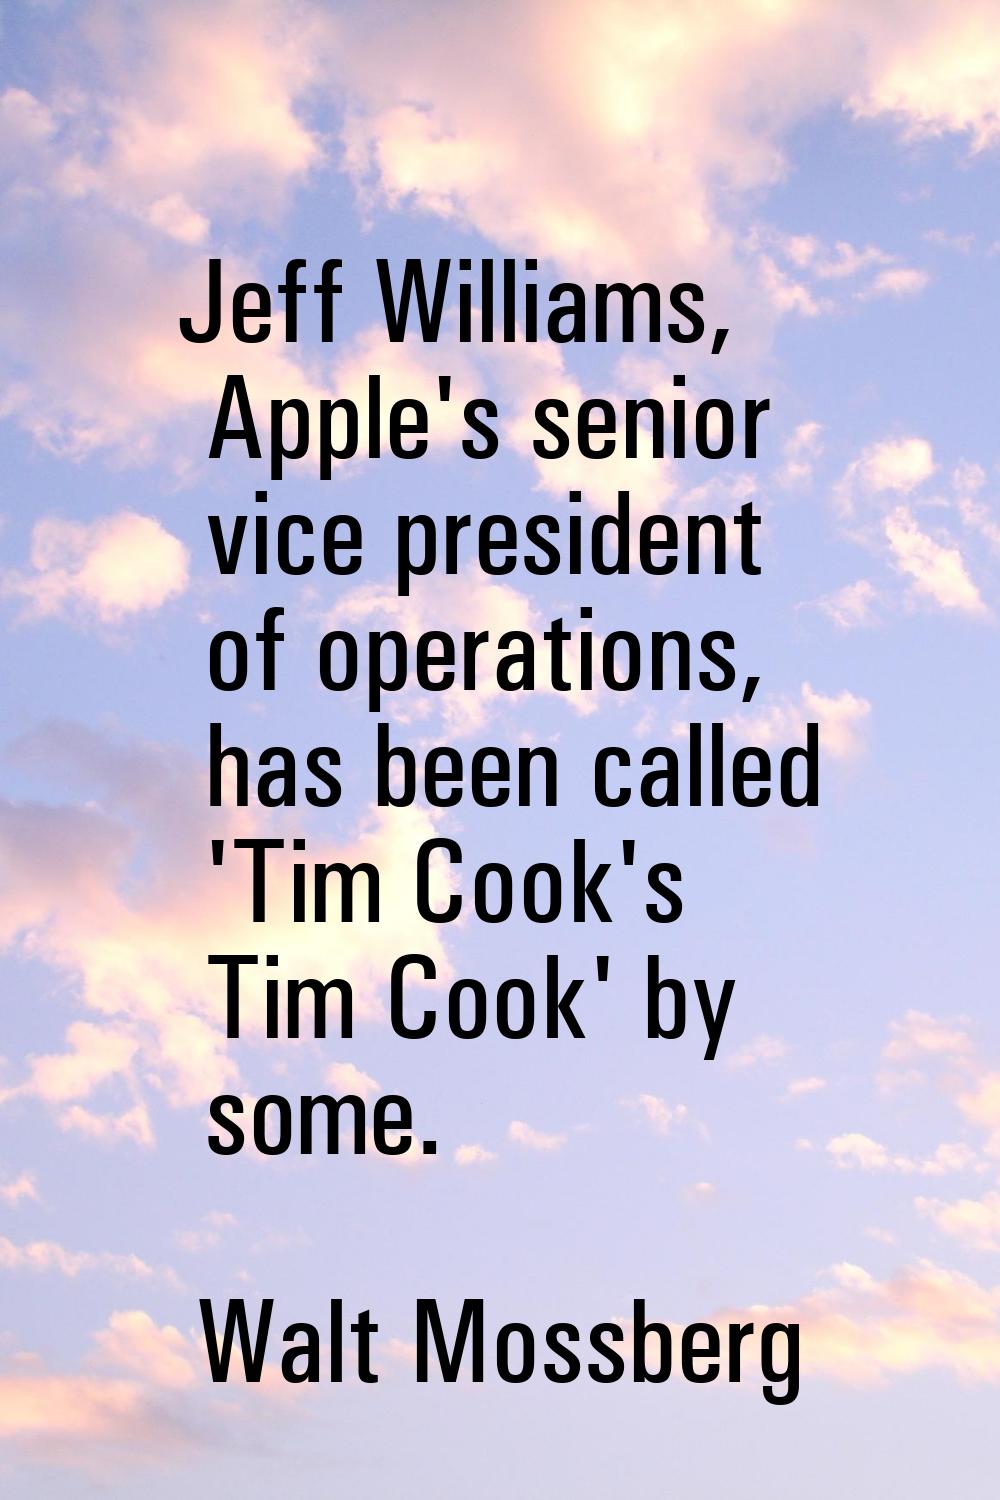 Jeff Williams, Apple's senior vice president of operations, has been called 'Tim Cook's Tim Cook' b